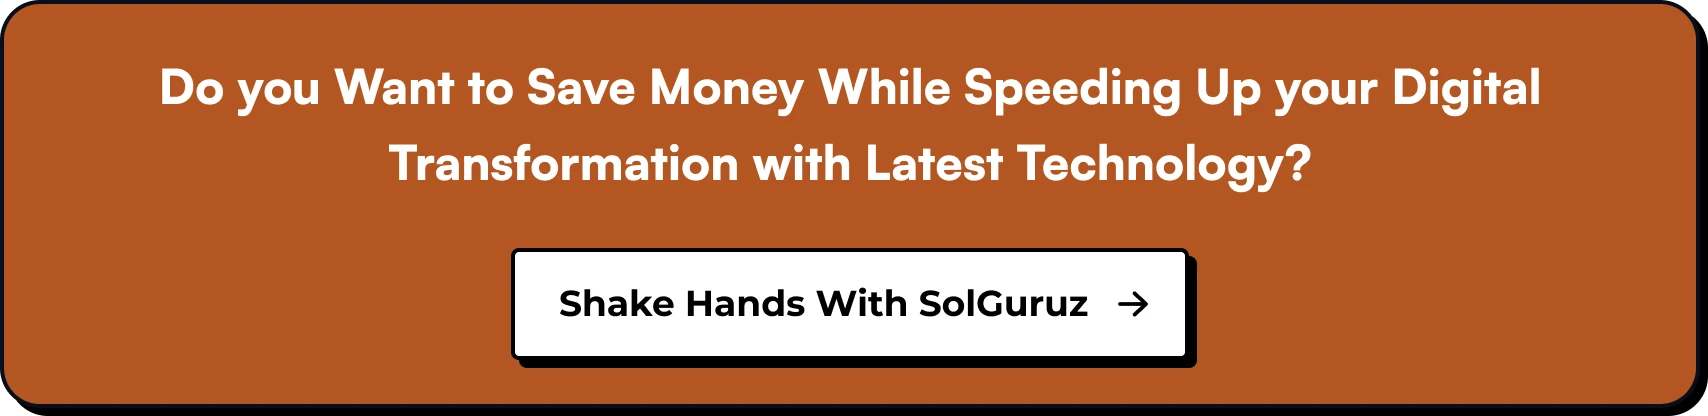 Do you Want to Save Money While Speeding Up your Digital Transformation with Latest Technology